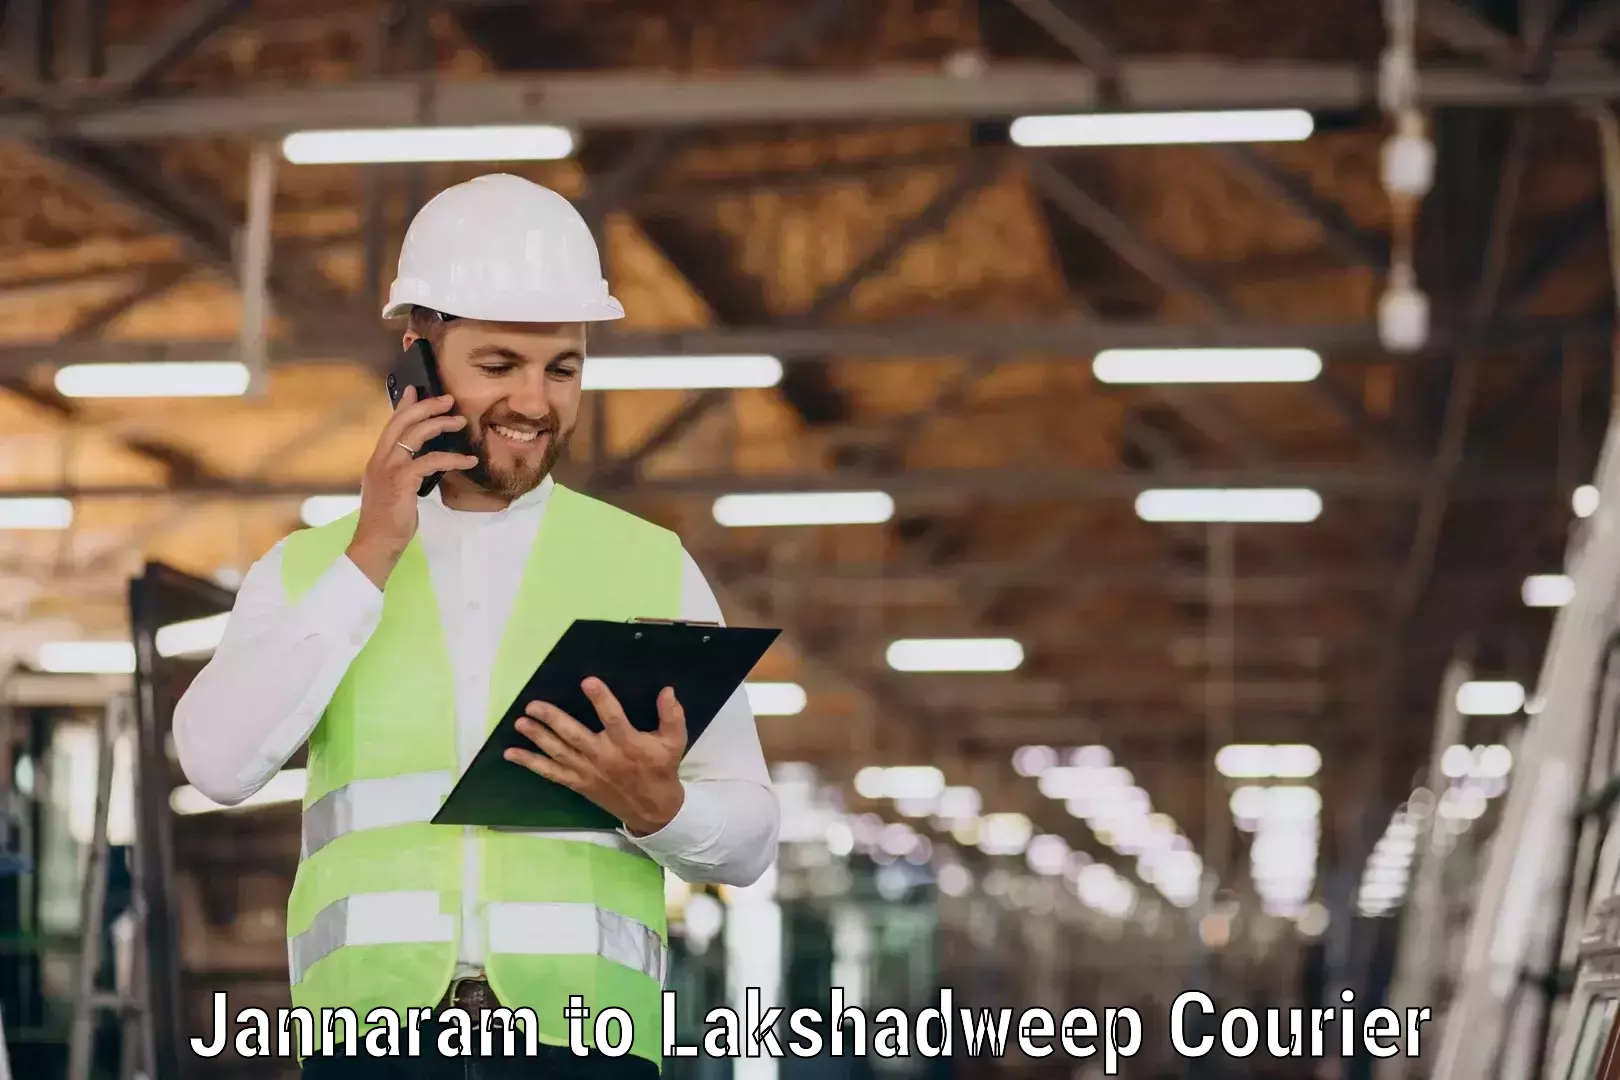 24-hour courier service Jannaram to Lakshadweep